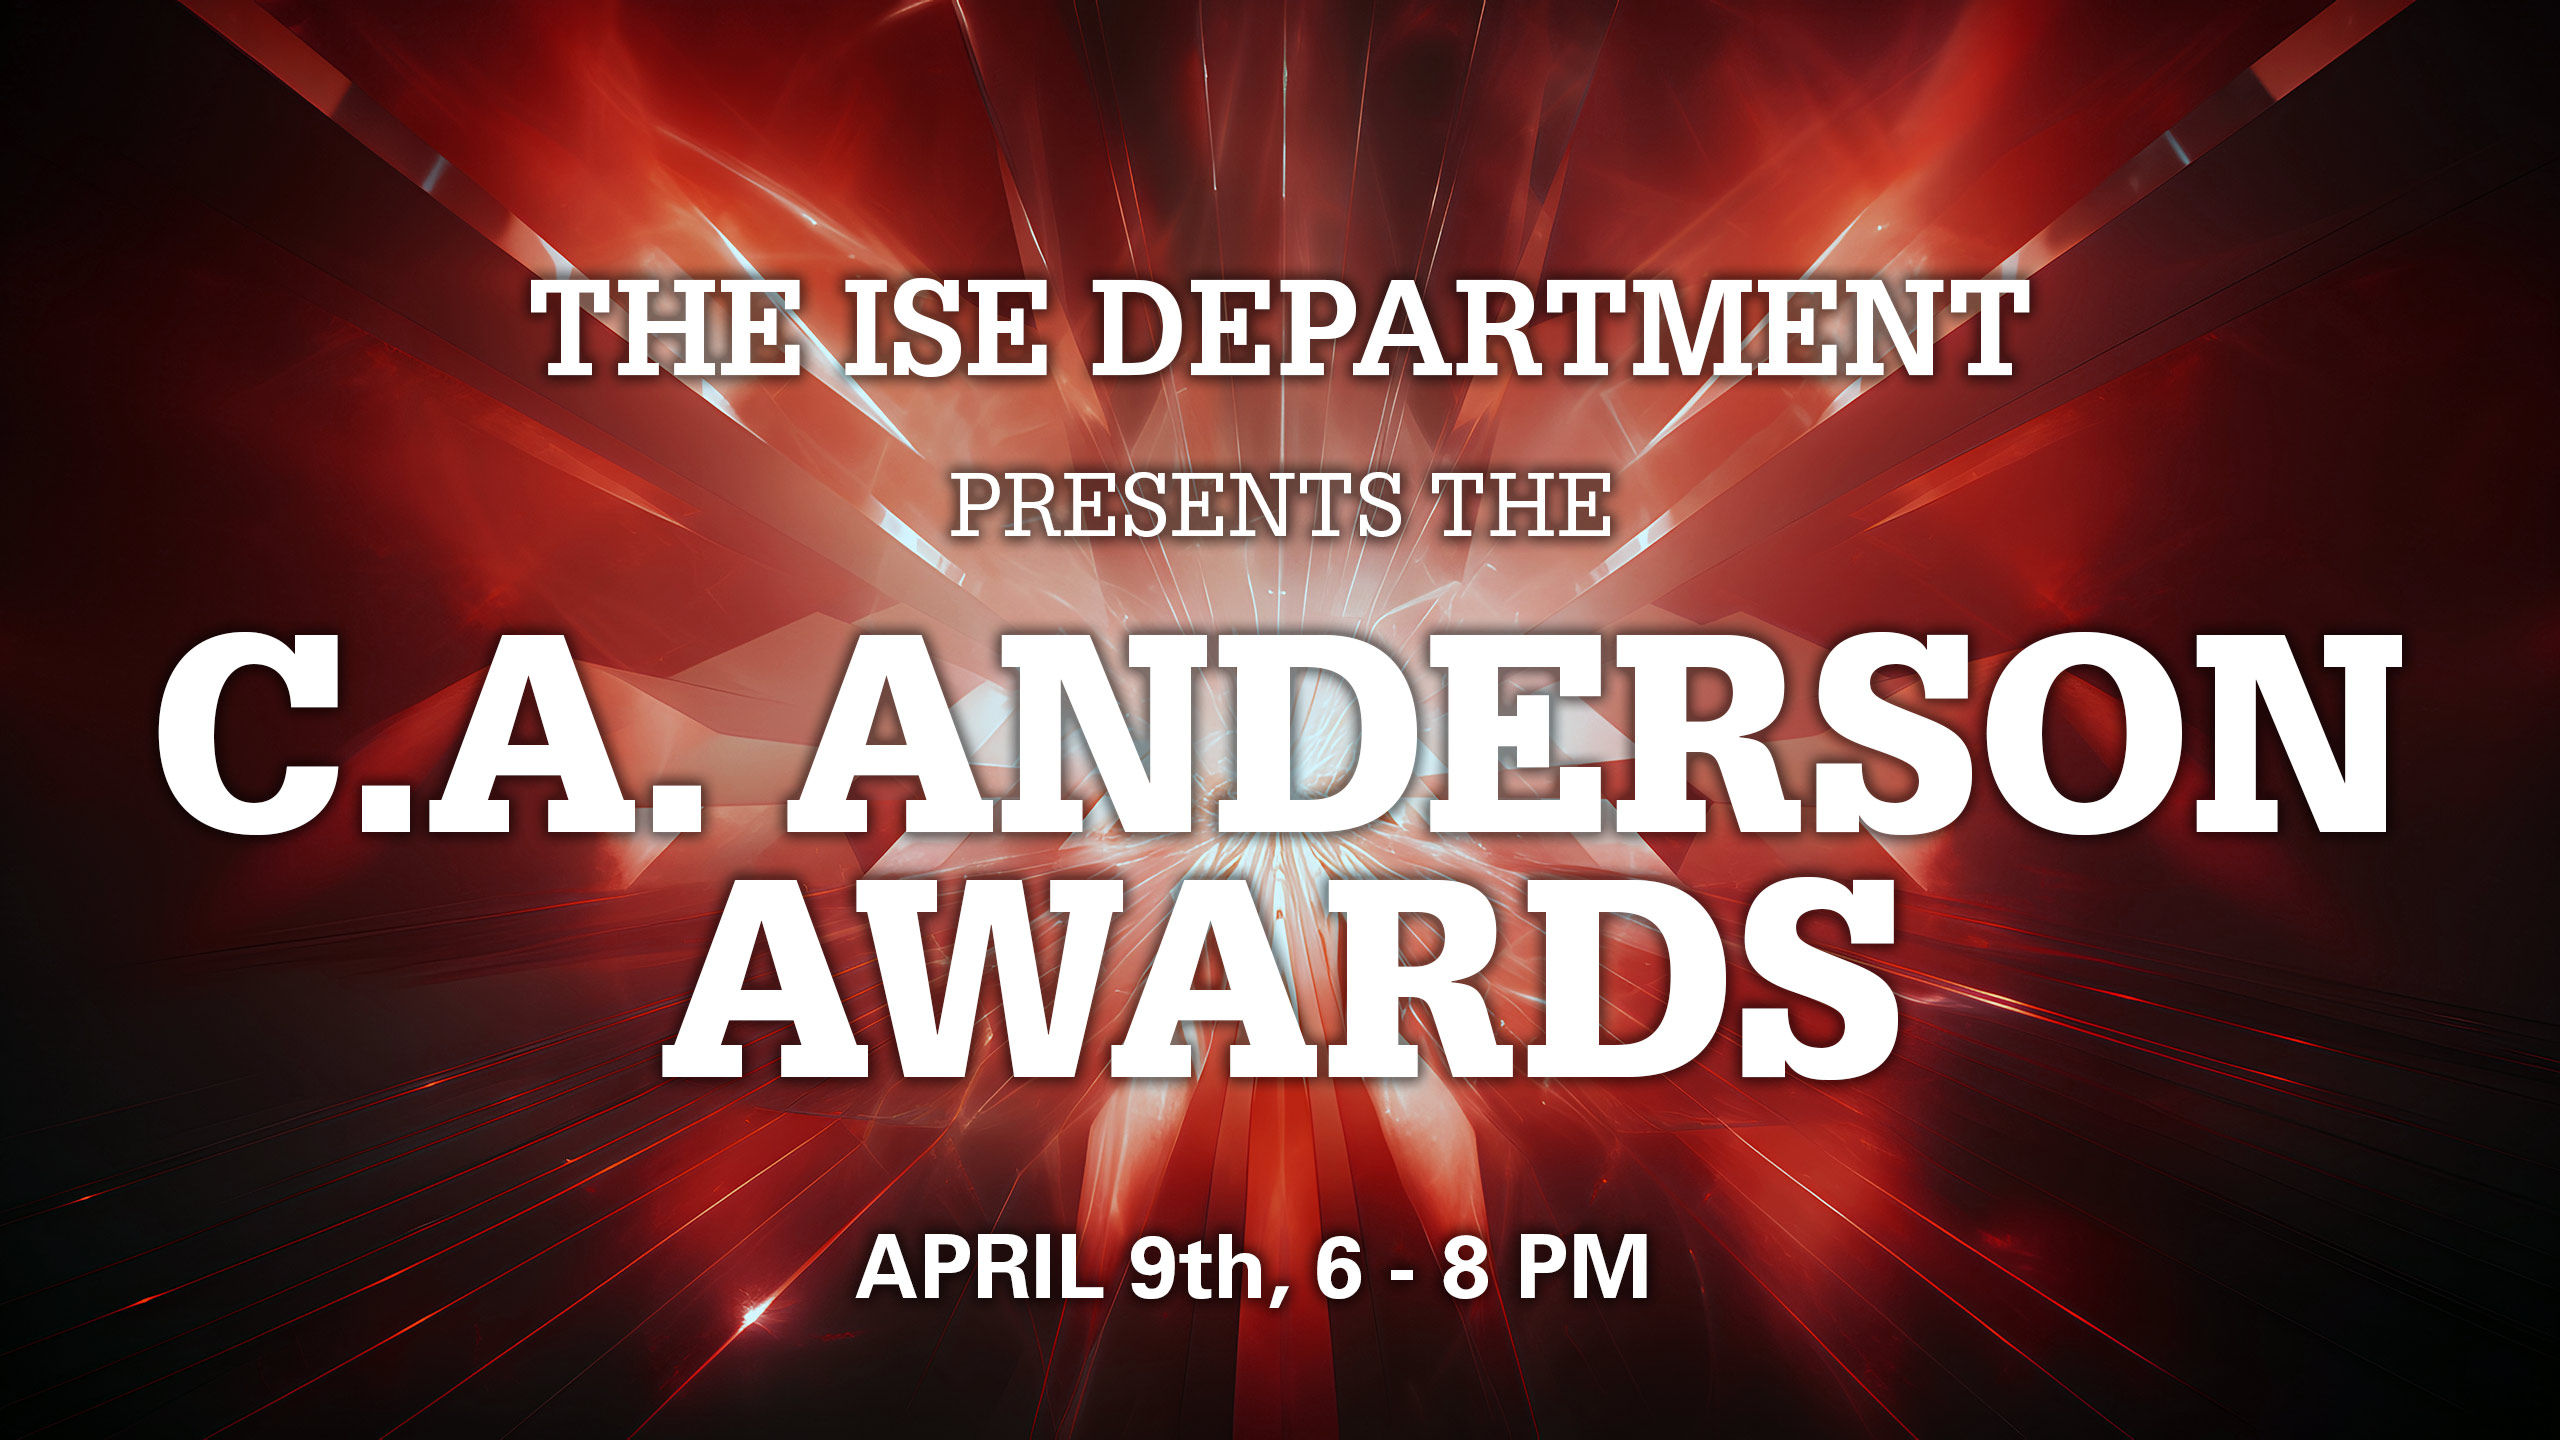 The 47th Annual C.A. Anderson Awards